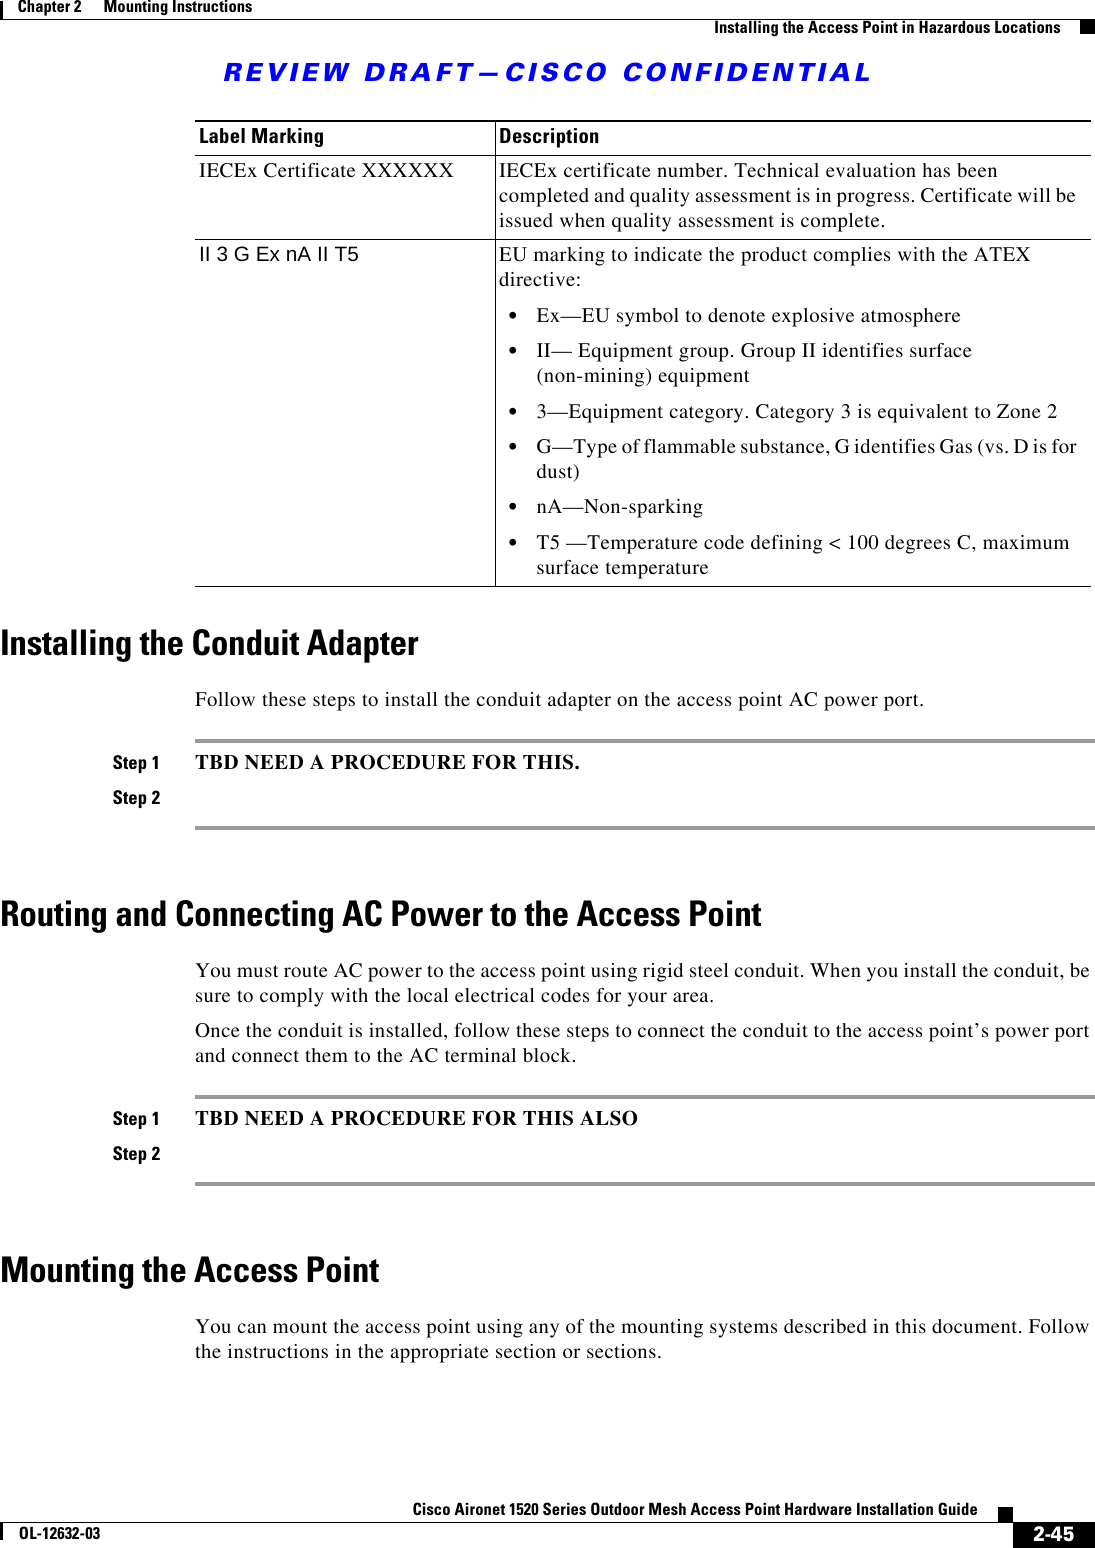 REVIEW DRAFT—CISCO CONFIDENTIAL2-45Cisco Aironet 1520 Series Outdoor Mesh Access Point Hardware Installation GuideOL-12632-03Chapter 2      Mounting Instructions  Installing the Access Point in Hazardous LocationsInstalling the Conduit AdapterFollow these steps to install the conduit adapter on the access point AC power port.Step 1 TBD NEED A PROCEDURE FOR THIS.Step 2Routing and Connecting AC Power to the Access PointYou must route AC power to the access point using rigid steel conduit. When you install the conduit, be sure to comply with the local electrical codes for your area.Once the conduit is installed, follow these steps to connect the conduit to the access point’s power port and connect them to the AC terminal block.Step 1 TBD NEED A PROCEDURE FOR THIS ALSOStep 2Mounting the Access PointYou can mount the access point using any of the mounting systems described in this document. Follow the instructions in the appropriate section or sections. IECEx Certificate XXXXXX IECEx certificate number. Technical evaluation has been completed and quality assessment is in progress. Certificate will be issued when quality assessment is complete.II 3 G Ex nA II T5 EU marking to indicate the product complies with the ATEX directive:   • Ex—EU symbol to denote explosive atmosphere  • II— Equipment group. Group II identifies surface (non-mining) equipment  • 3—Equipment category. Category 3 is equivalent to Zone 2  • G—Type of flammable substance, G identifies Gas (vs. D is for dust)  • nA—Non-sparking  • T5 —Temperature code defining &lt; 100 degrees C, maximum surface temperatureLabel Marking Description